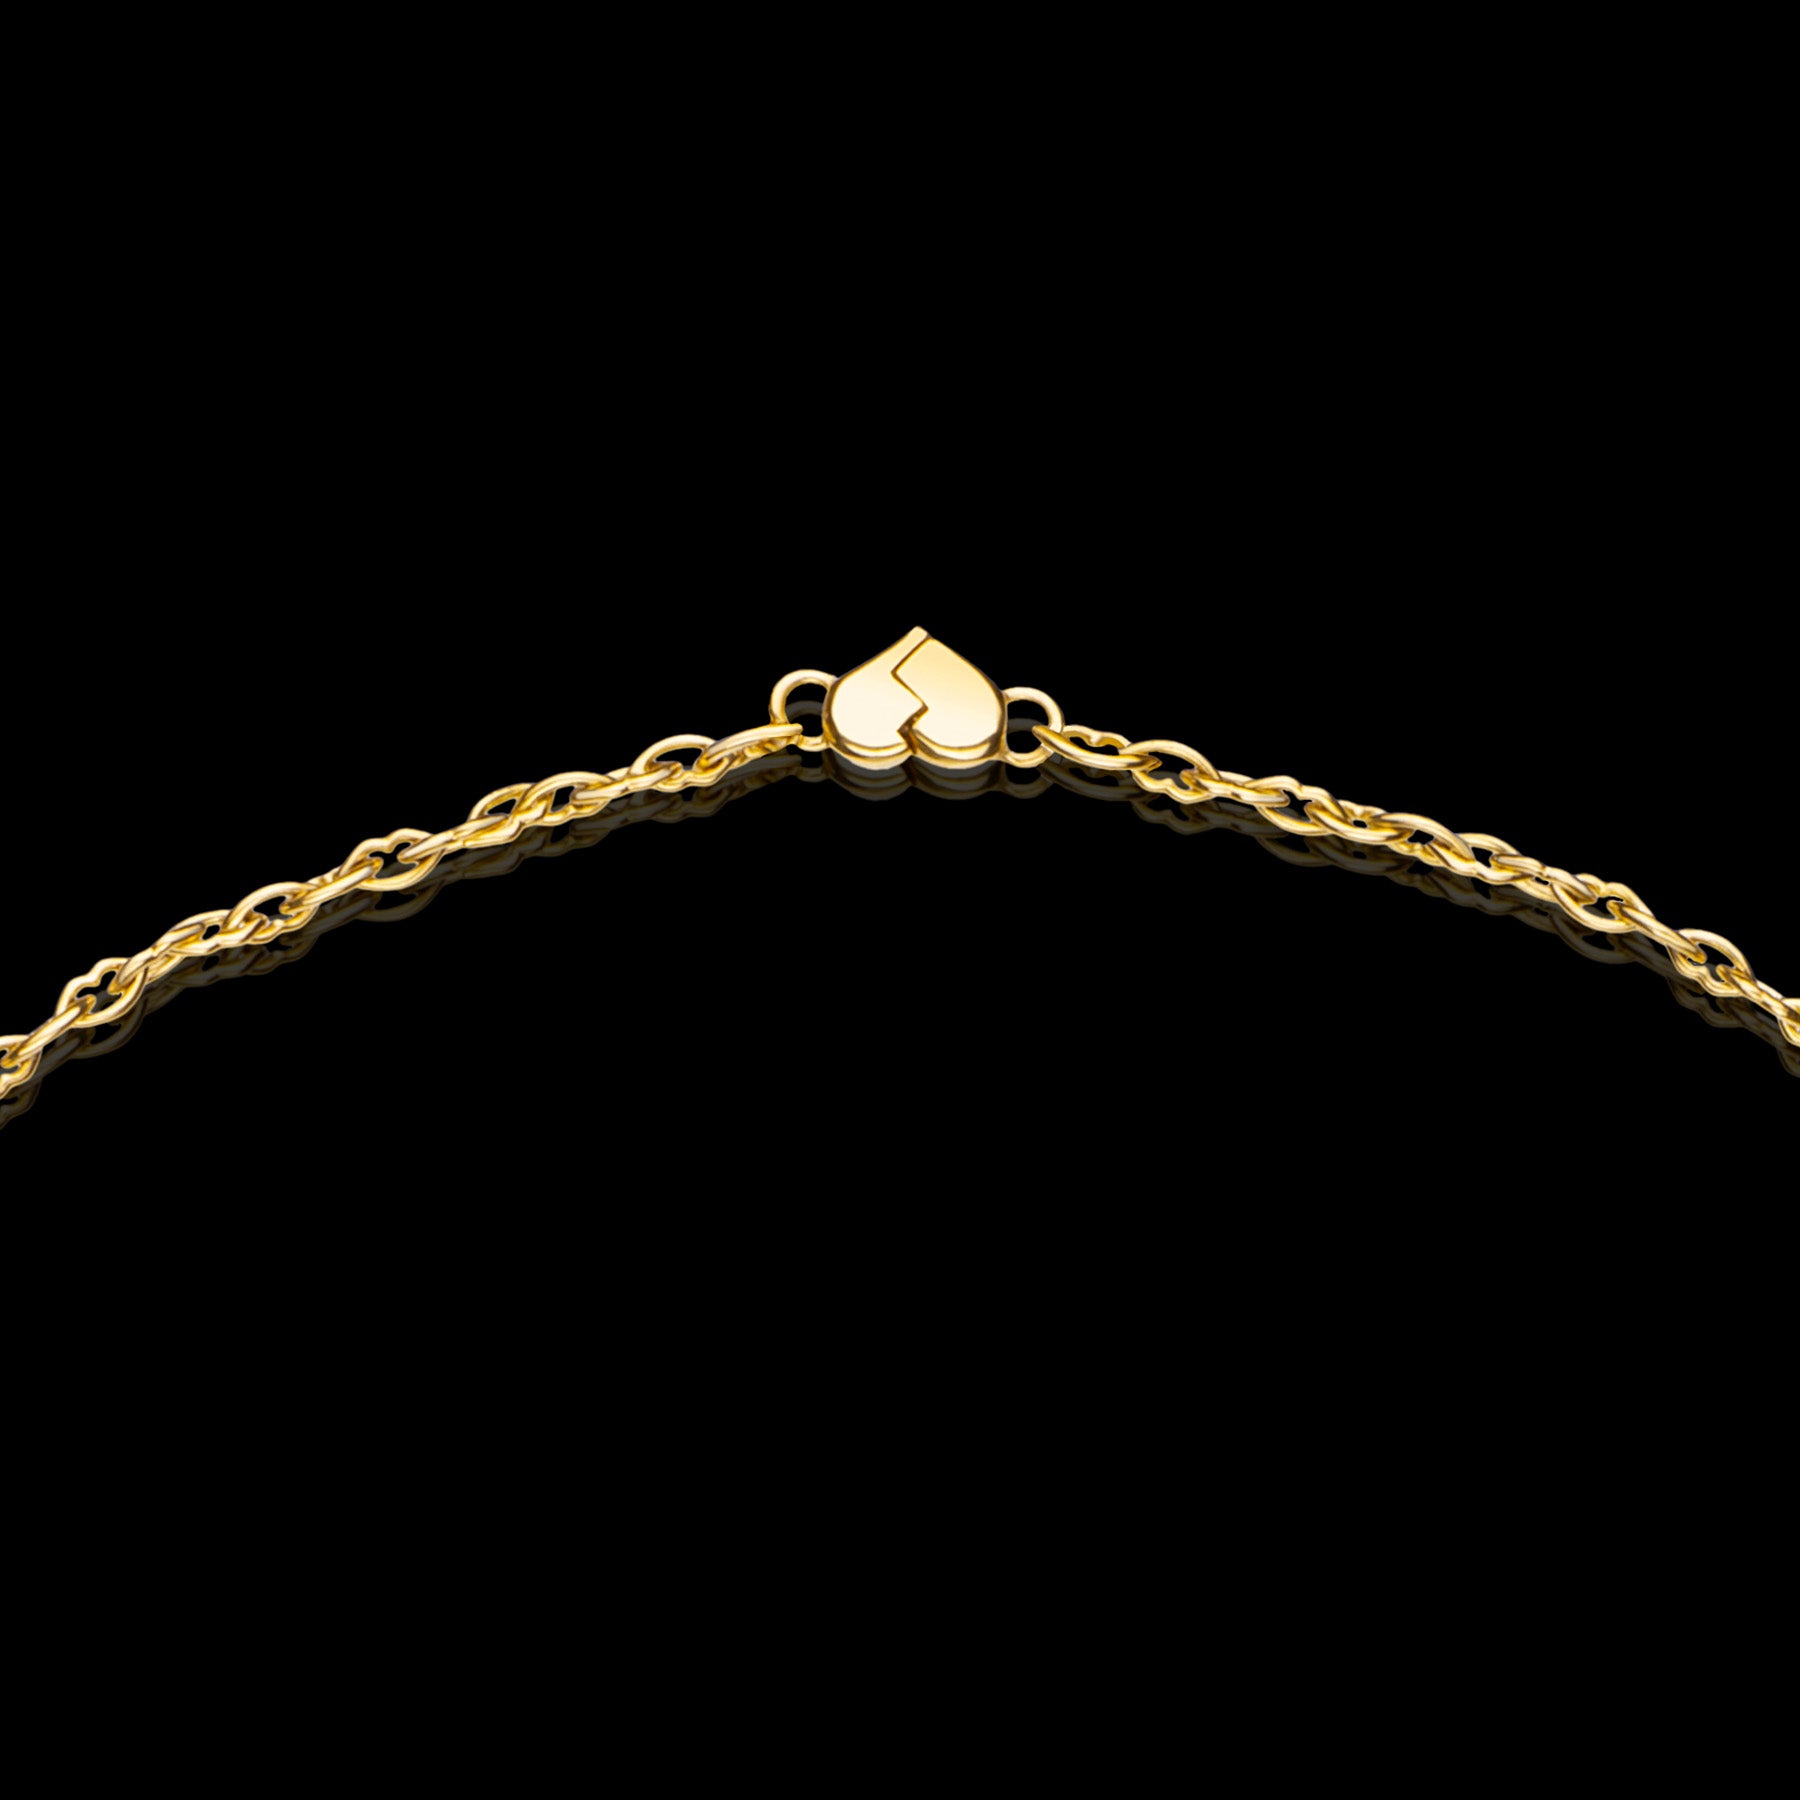 The Love and Kisses chain long necklace by designer Solange Azagury-Partridge - 18 carat Yellow Gold - detail crop